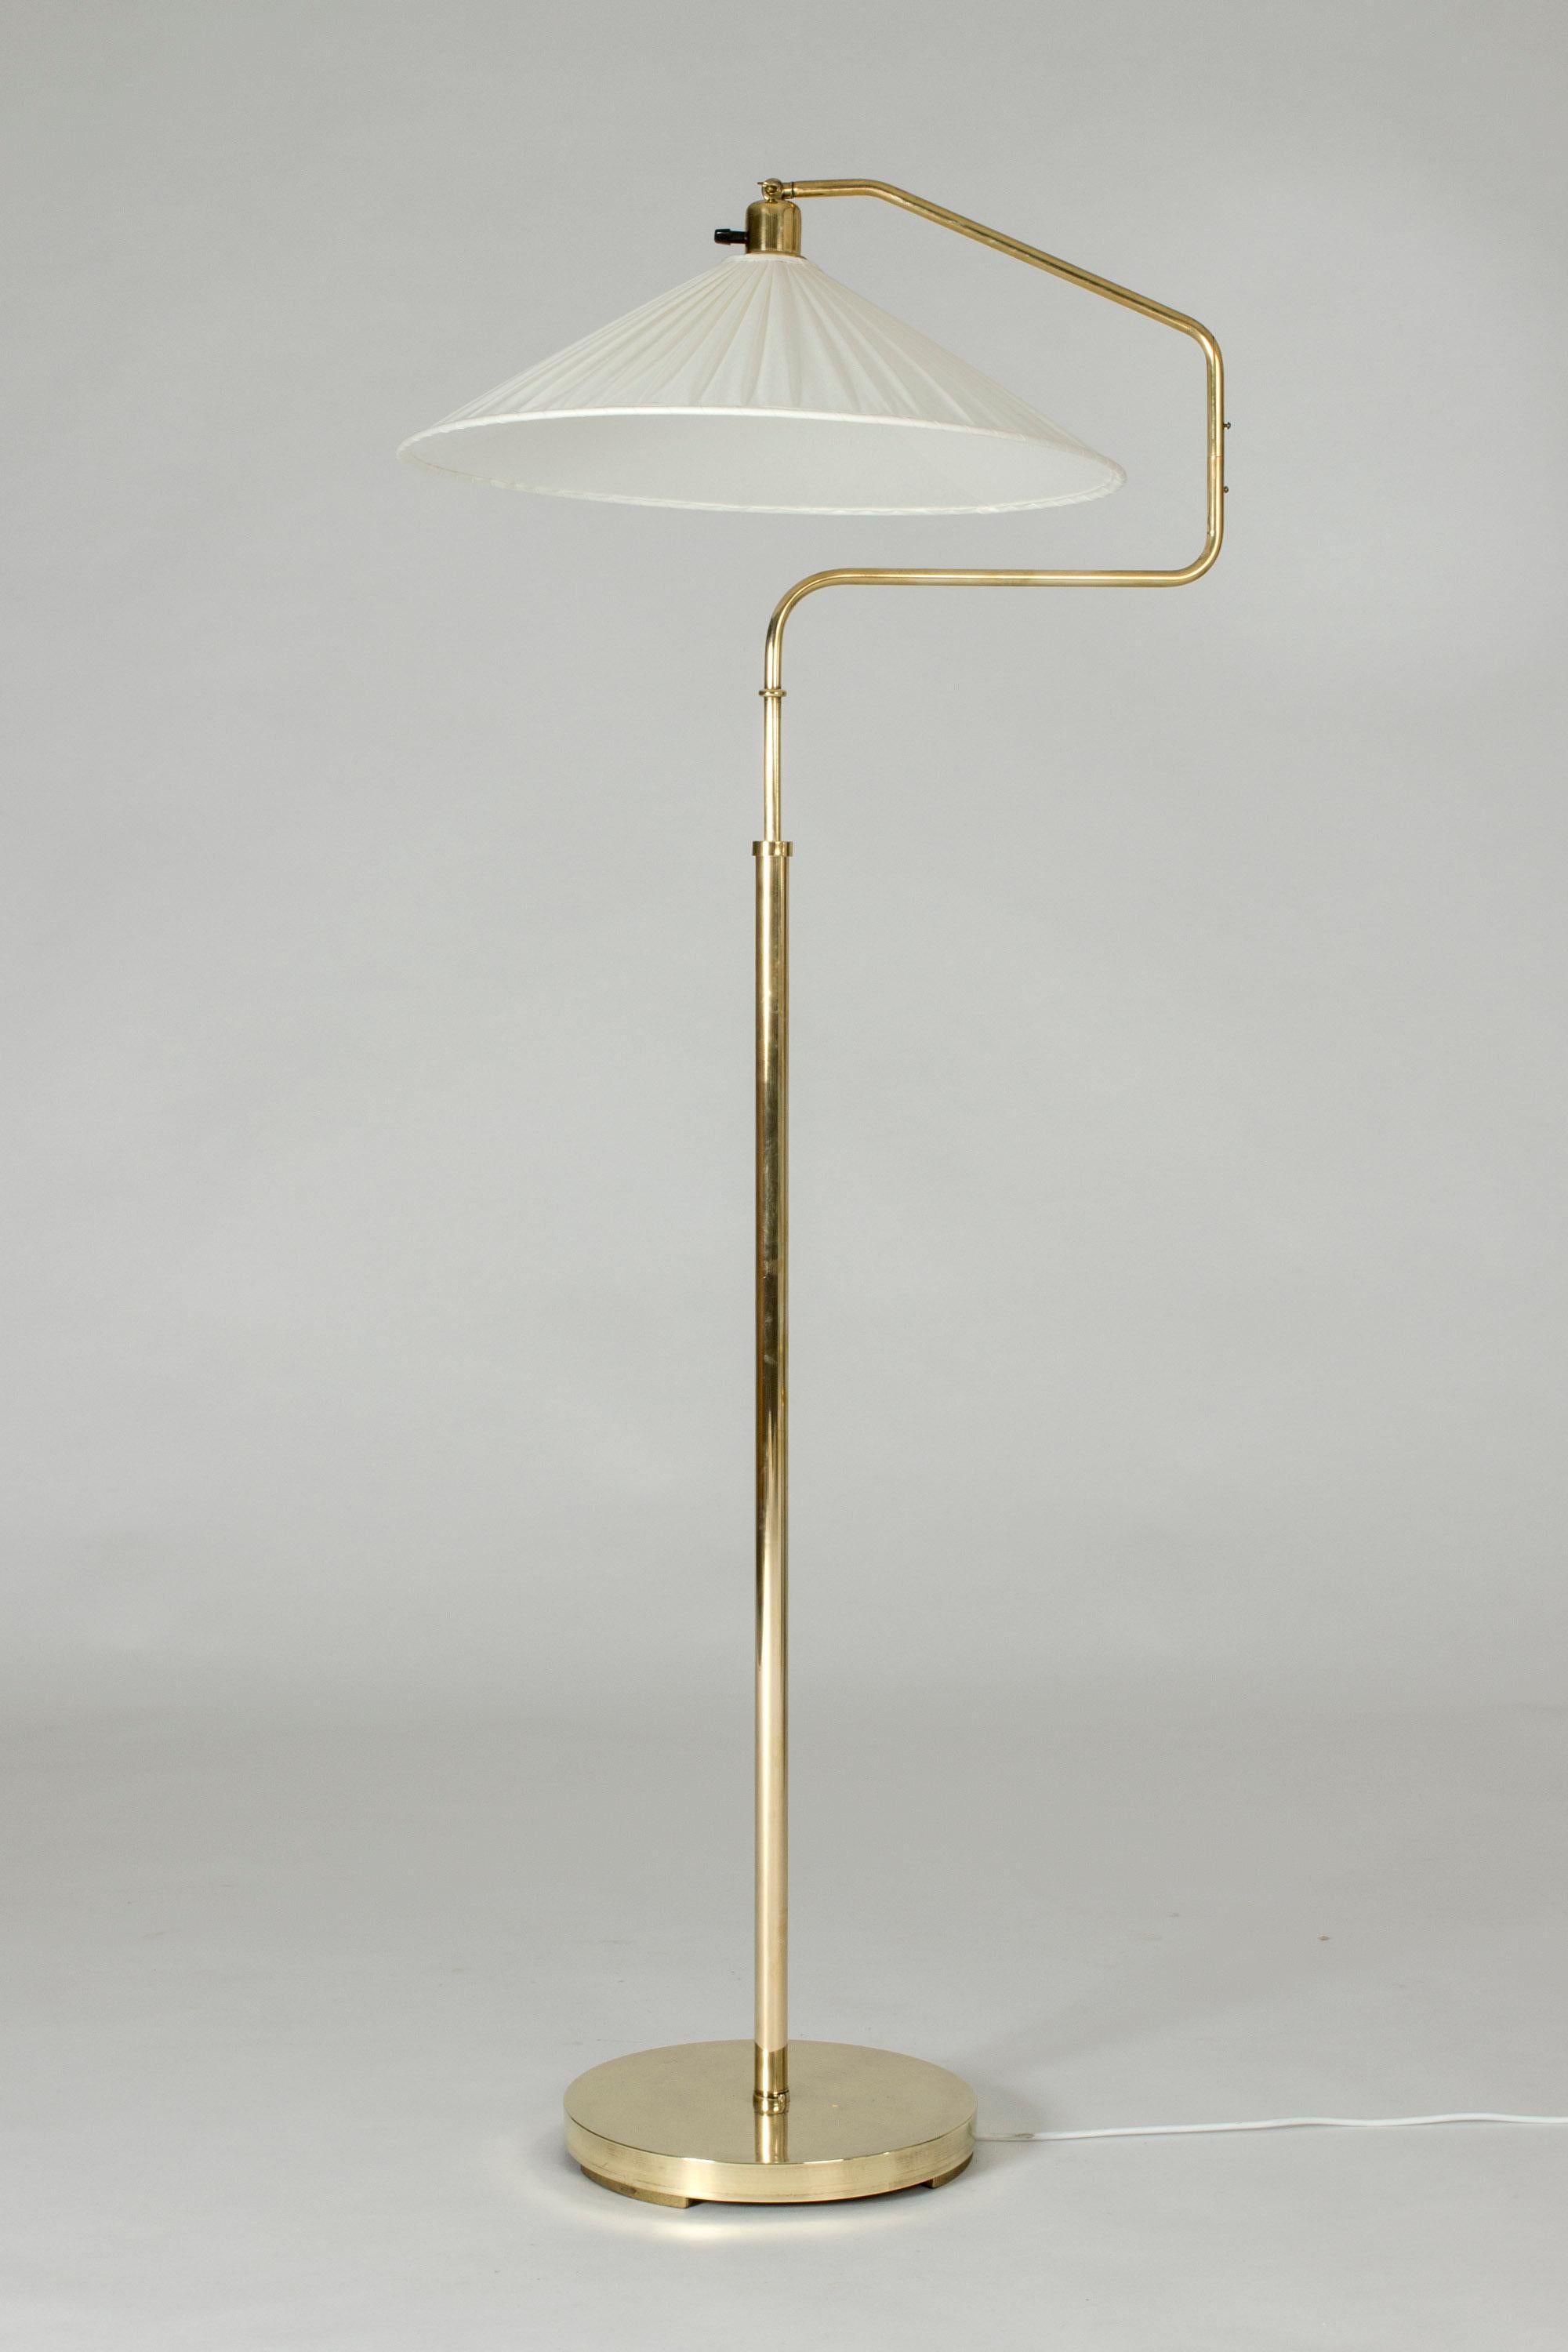 Swedish modern brass floor lamp with a long neck that can extend and elevate the shade in different directions. Adjustable height. Wide brass base with a solid weight.